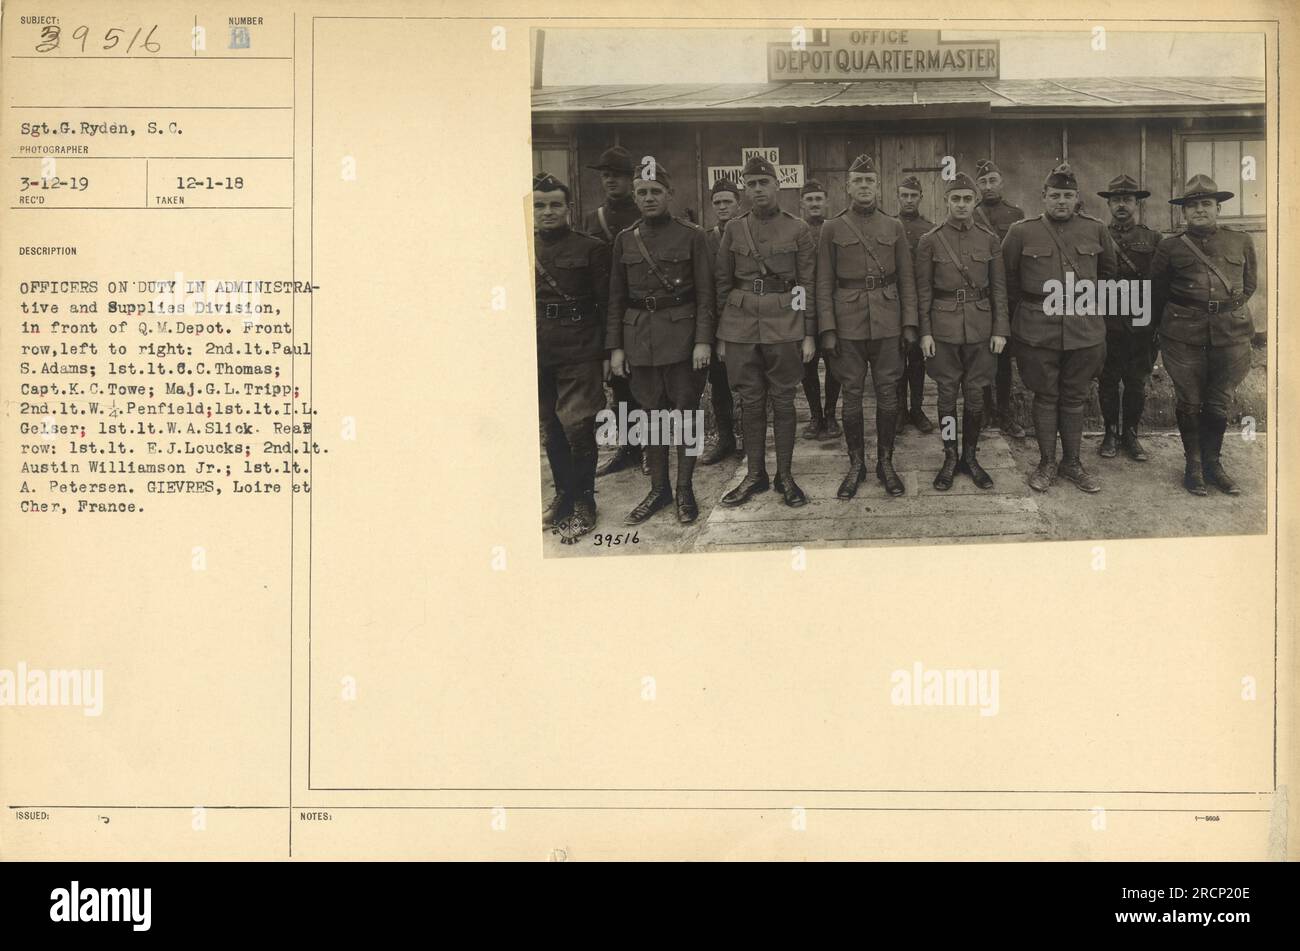 Officers from the Administrative and Supplies Division of the U.S. military are seen in front of the Q.M. Depot in Gievres, France. The photograph includes 2nd Lt. Paul S. Adams, 1st Lt. C.C. Thomas, Capt. K.C. Towe, Maj. G.L. Tripp, 2nd Lt. W. Penfield, 1st Lt. I.L. Gelser, 1st Lt. W.A. Slick, 1st Lt. E.J. Loucks, 2nd Lt. Austin Williamson Jr., and 1st Lt. A. Petersen. This photo was taken on March 12, 1919. Stock Photo